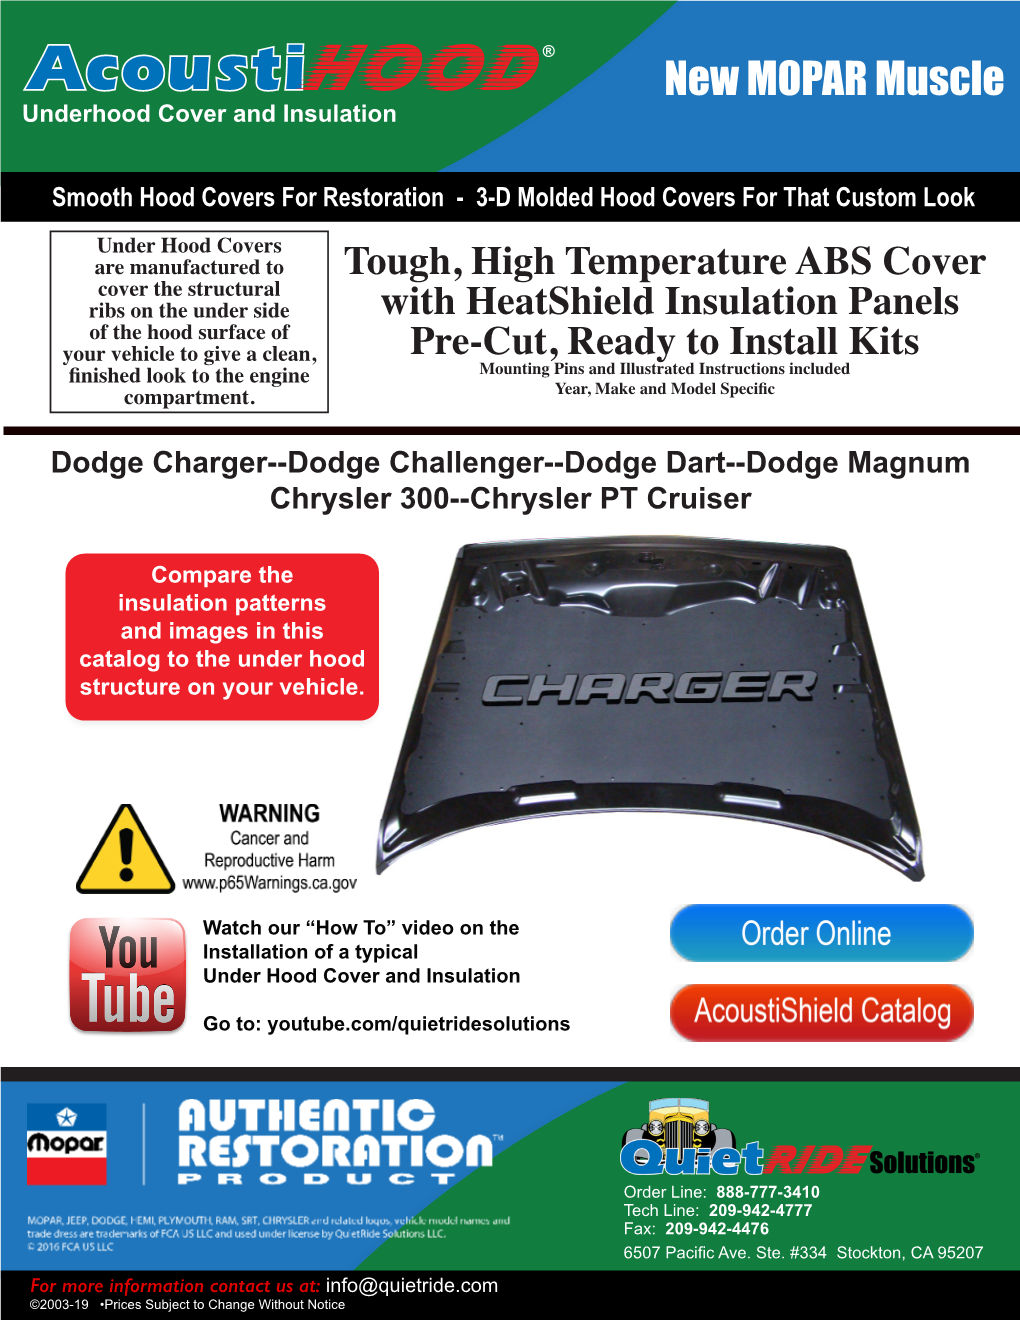 New MOPAR Muscle Underhood Cover and Insulation